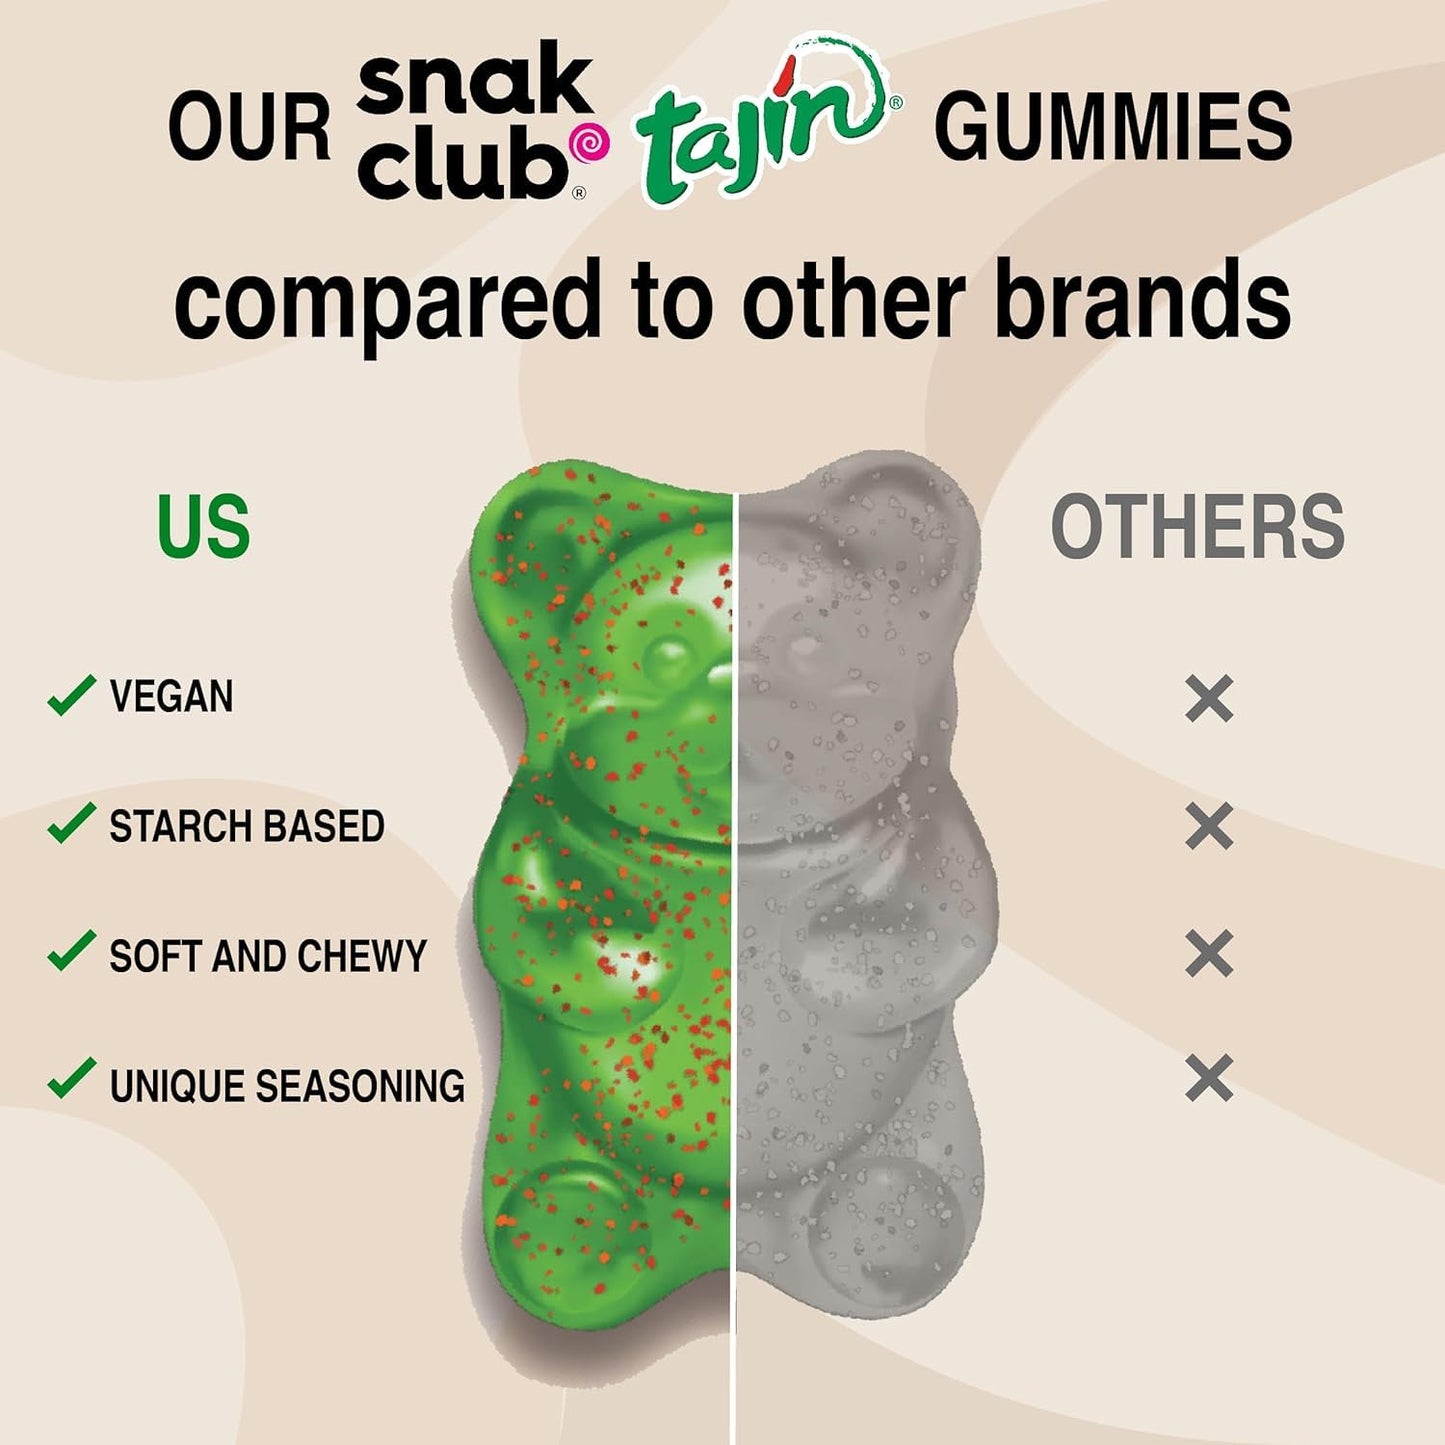 Snak Club Gummy Bears, Tajin Chili & Lime Sweet and Spicy Gummy Candy, Mild in Heat Bold in Flavor, Vegan, Gluten-Free Snack, 9 oz Large Resealable Bag